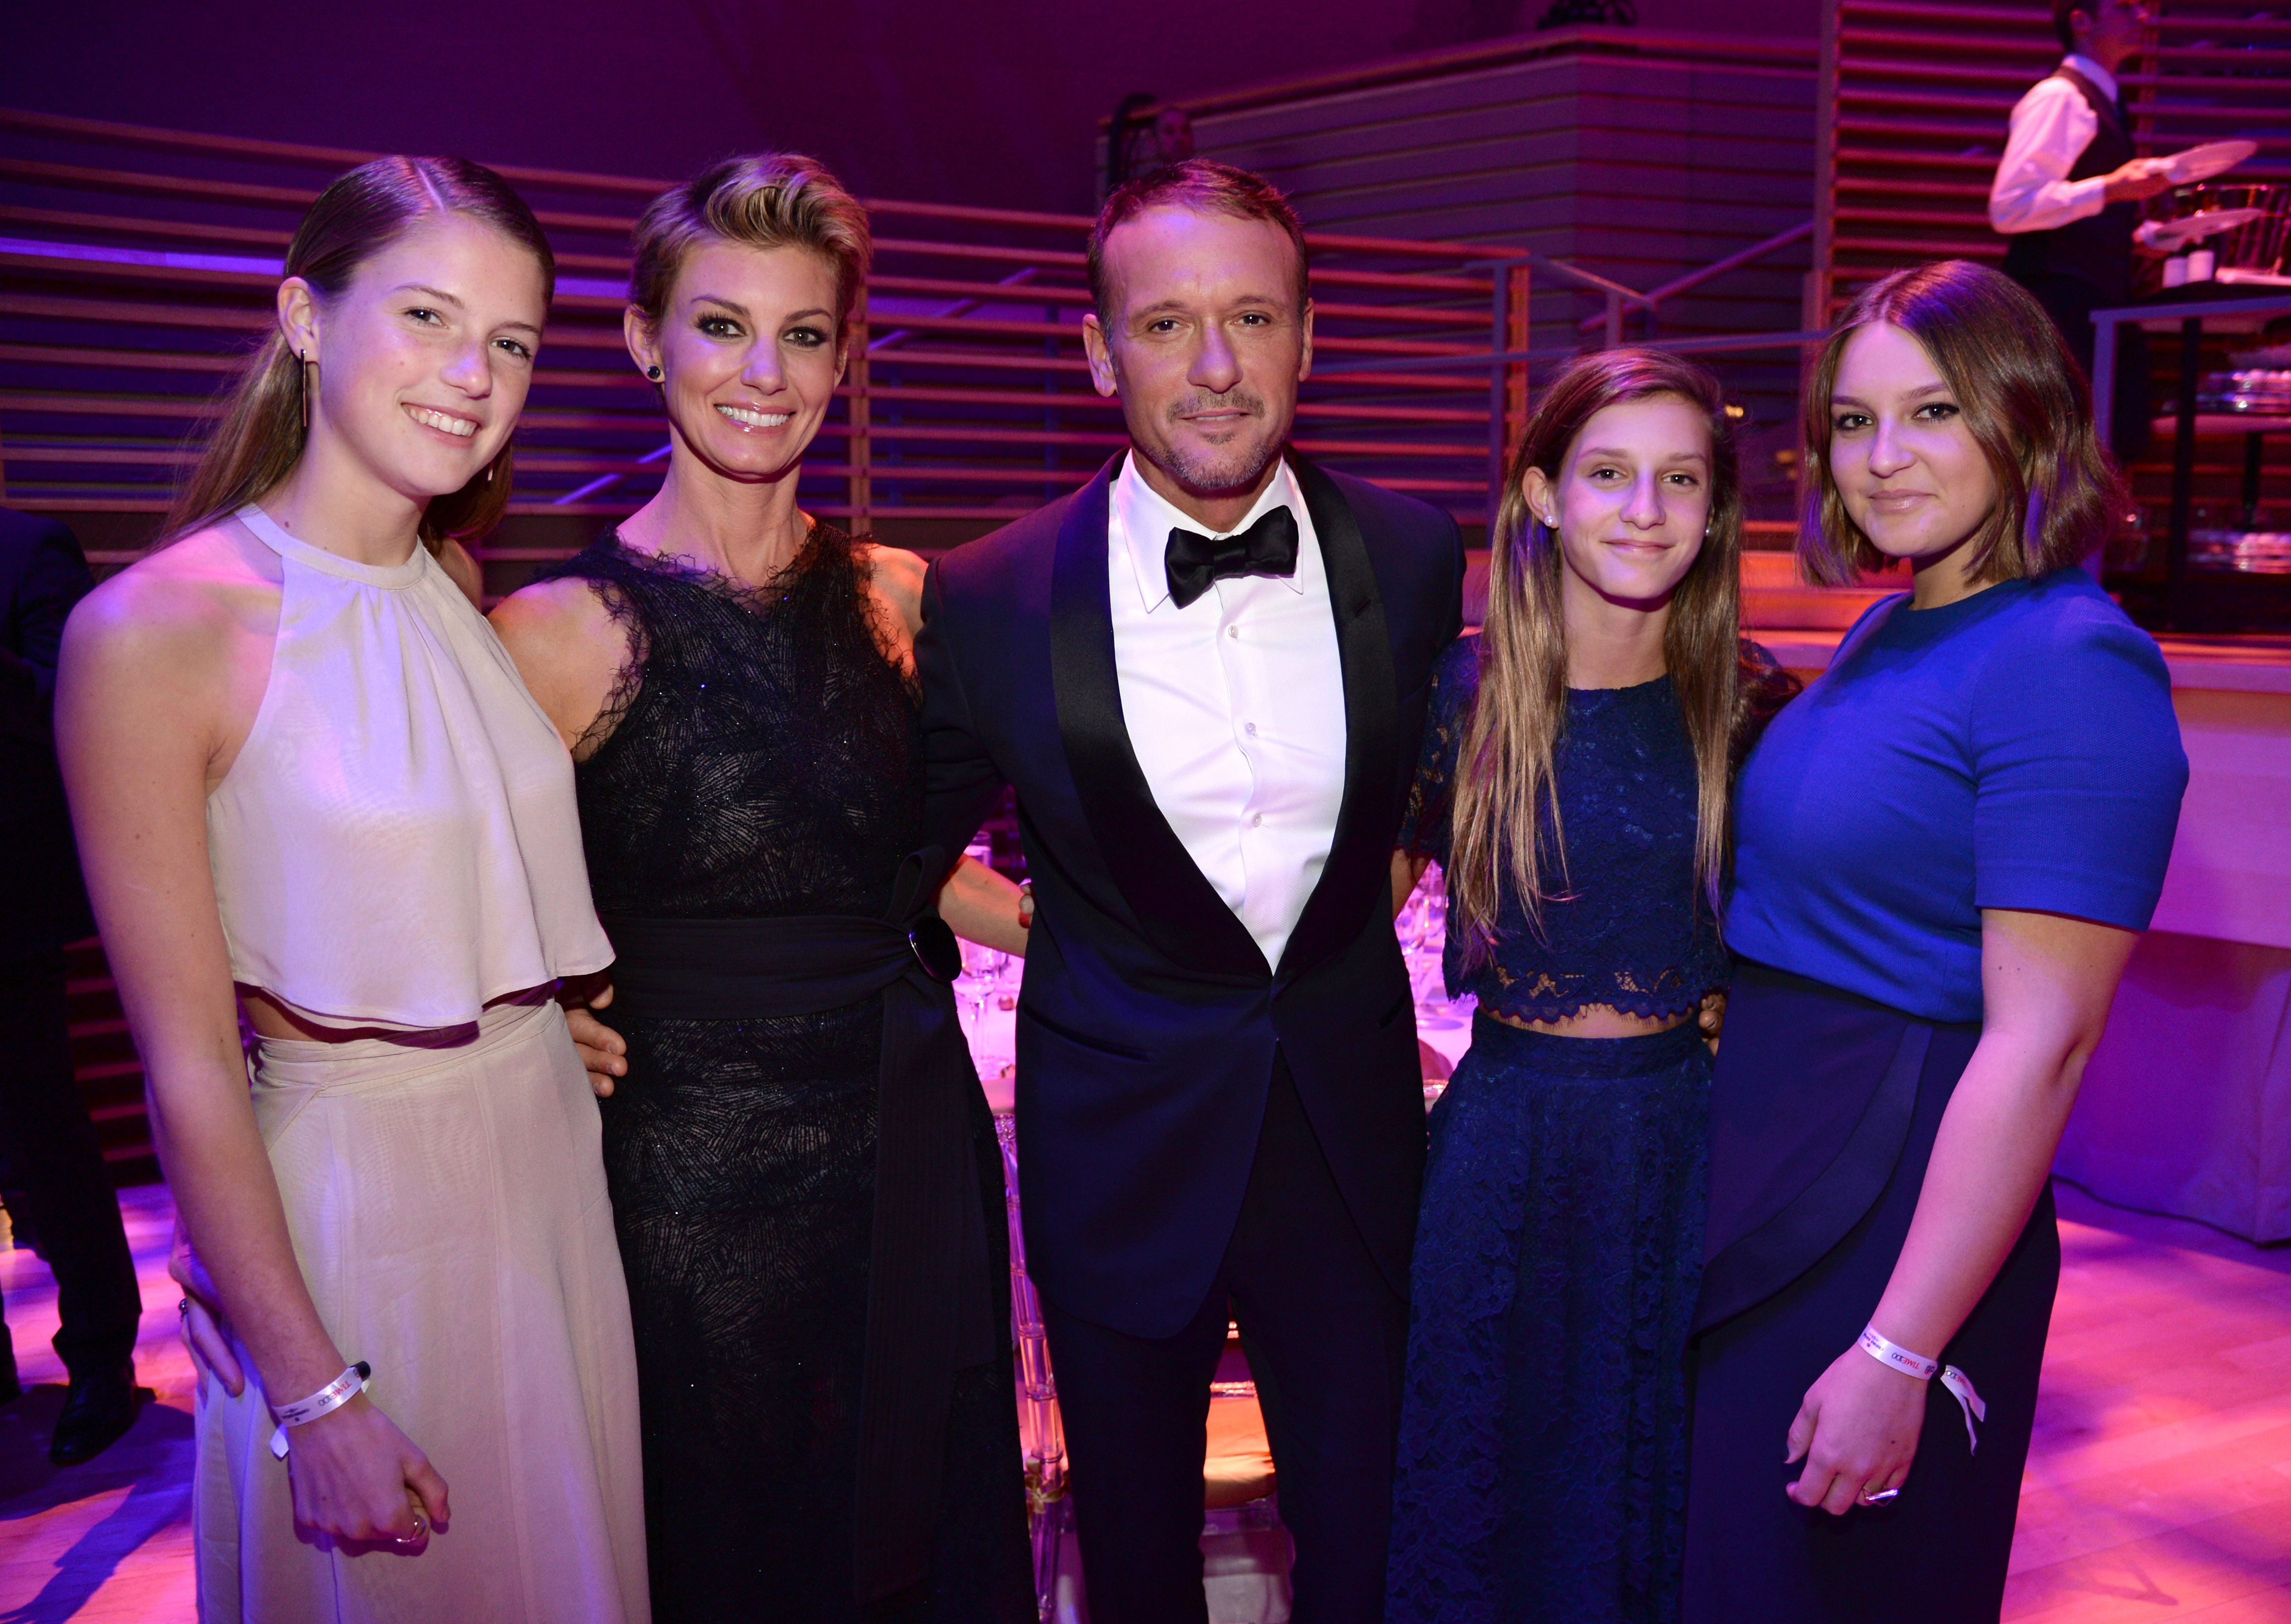 Gracie McGraw, Faith Hill, Tim McGraw, Audrey McGraw, and Maggie McGraw at TIME 100 Gala on April 21, 2015, in New York City | Source: Getty Images